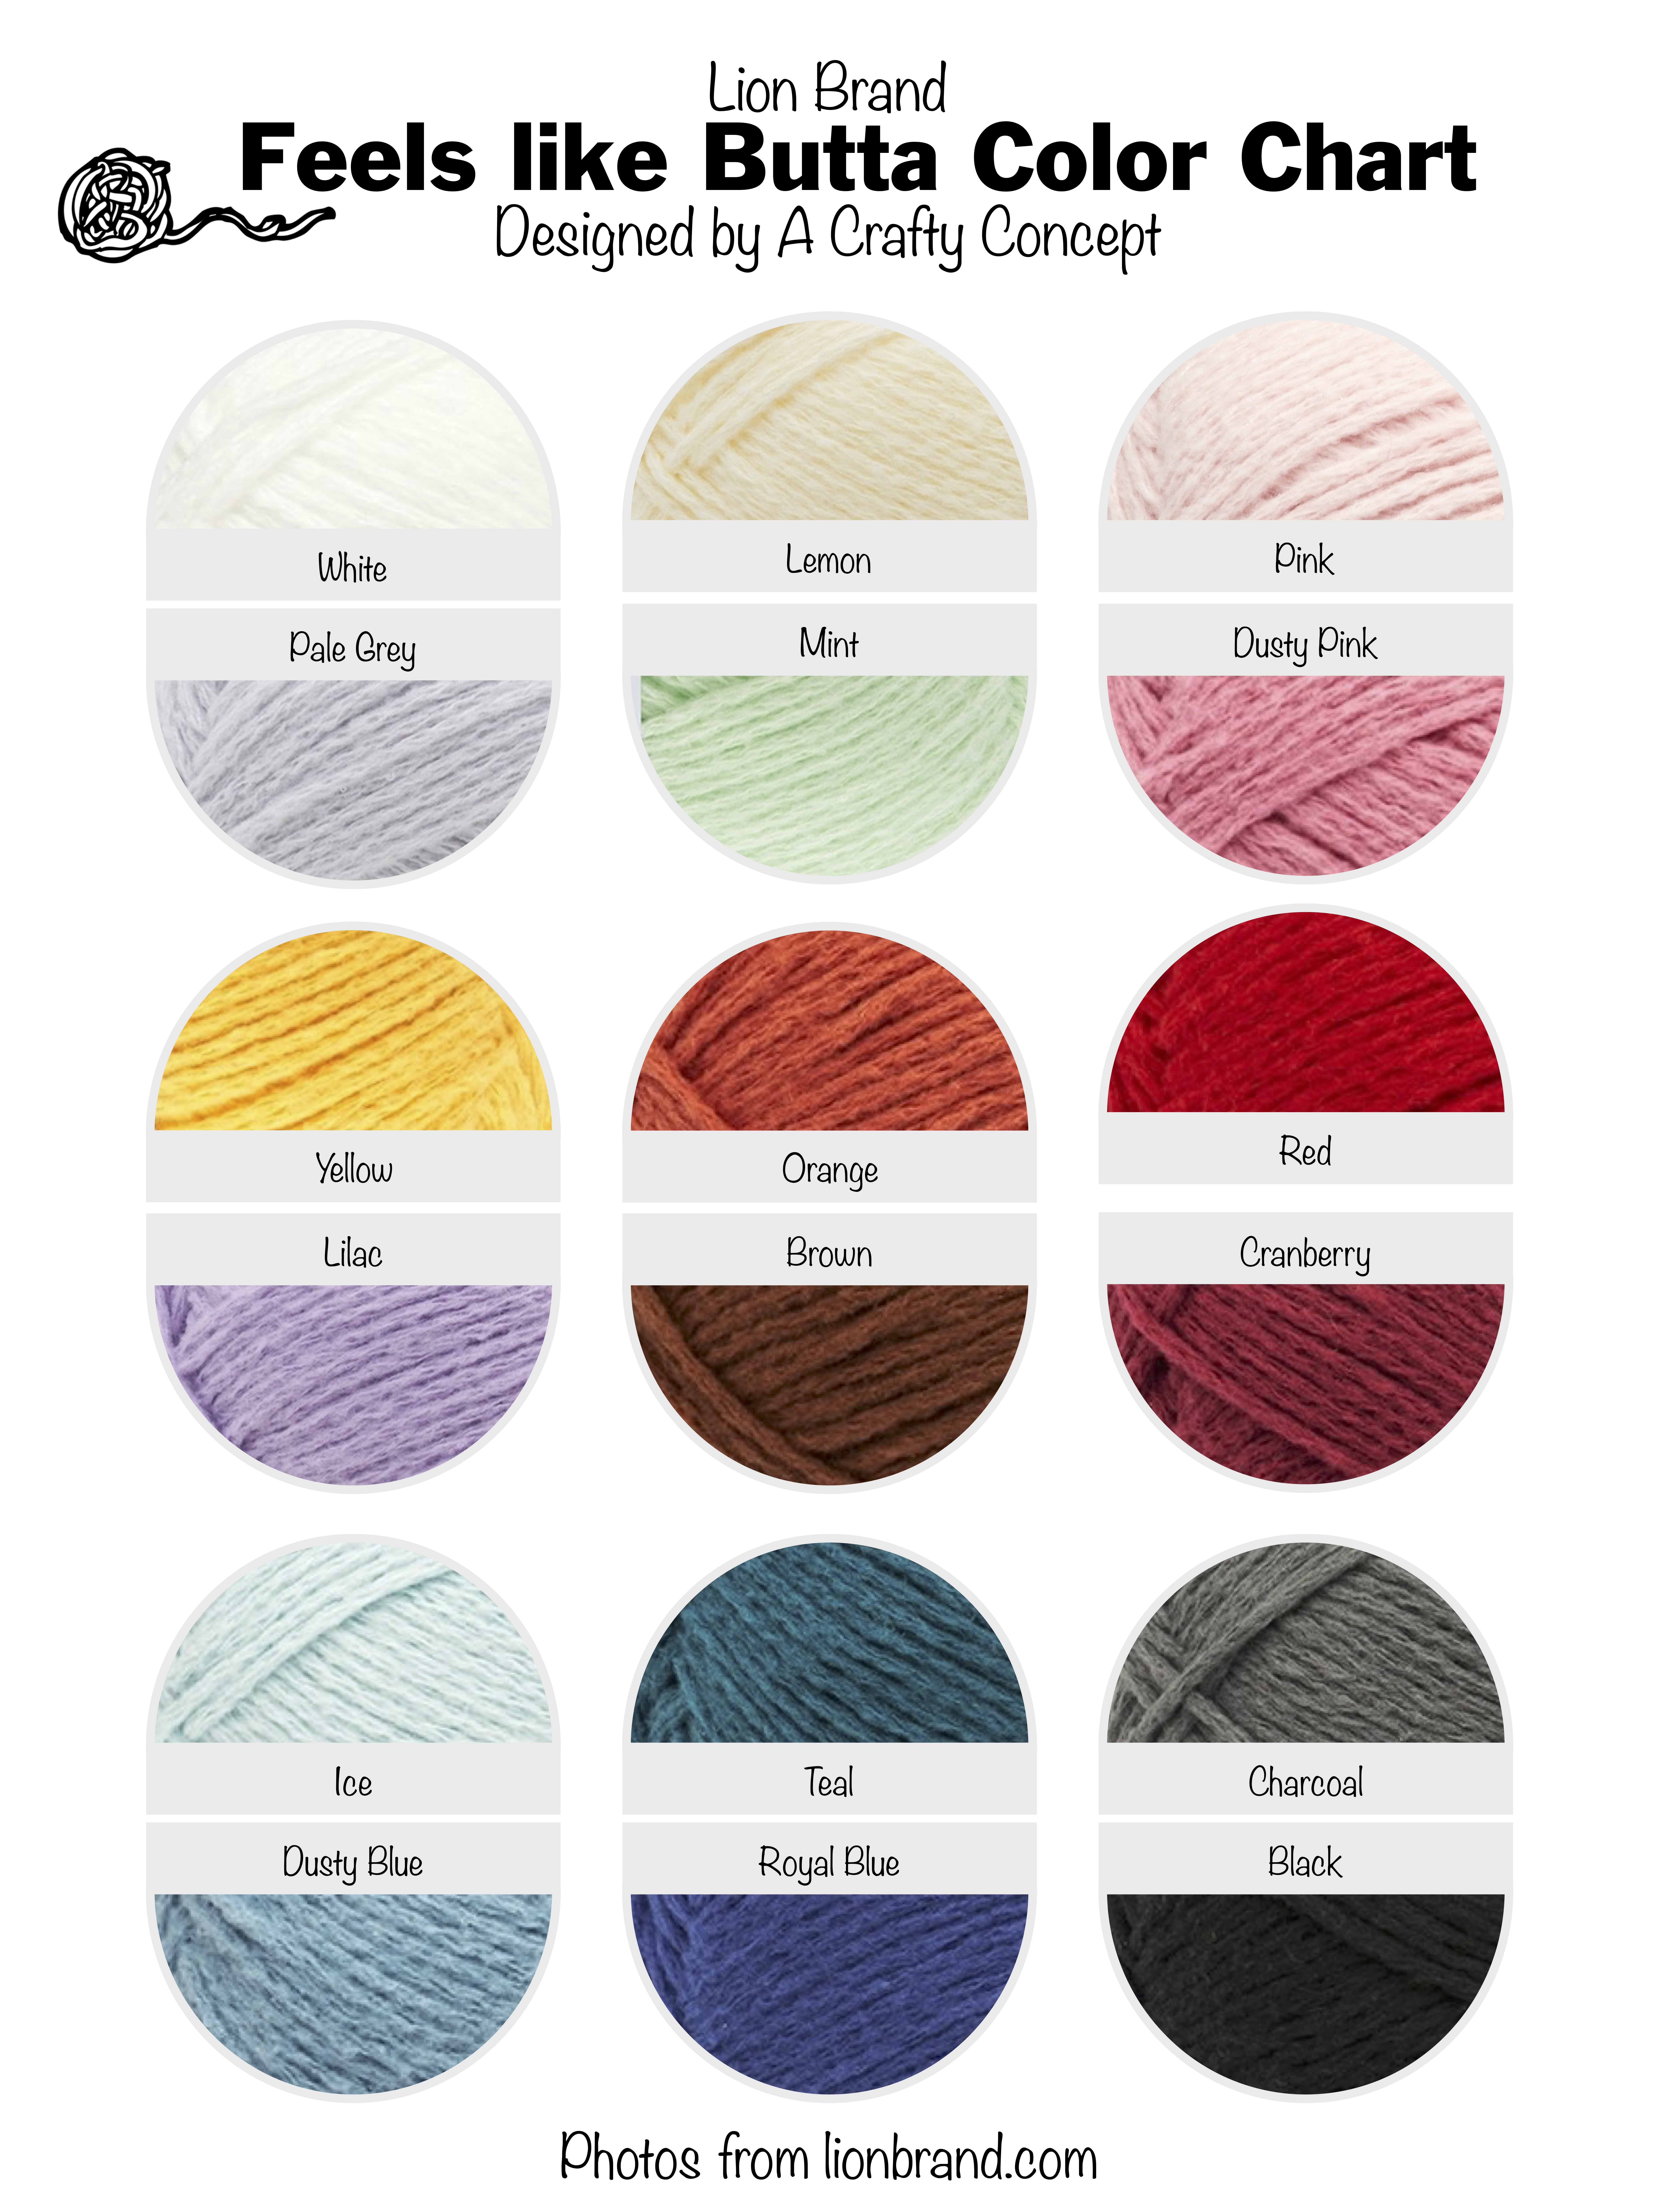 Hobby Lobbys I love This Yarn color chart - A Crafty Concept